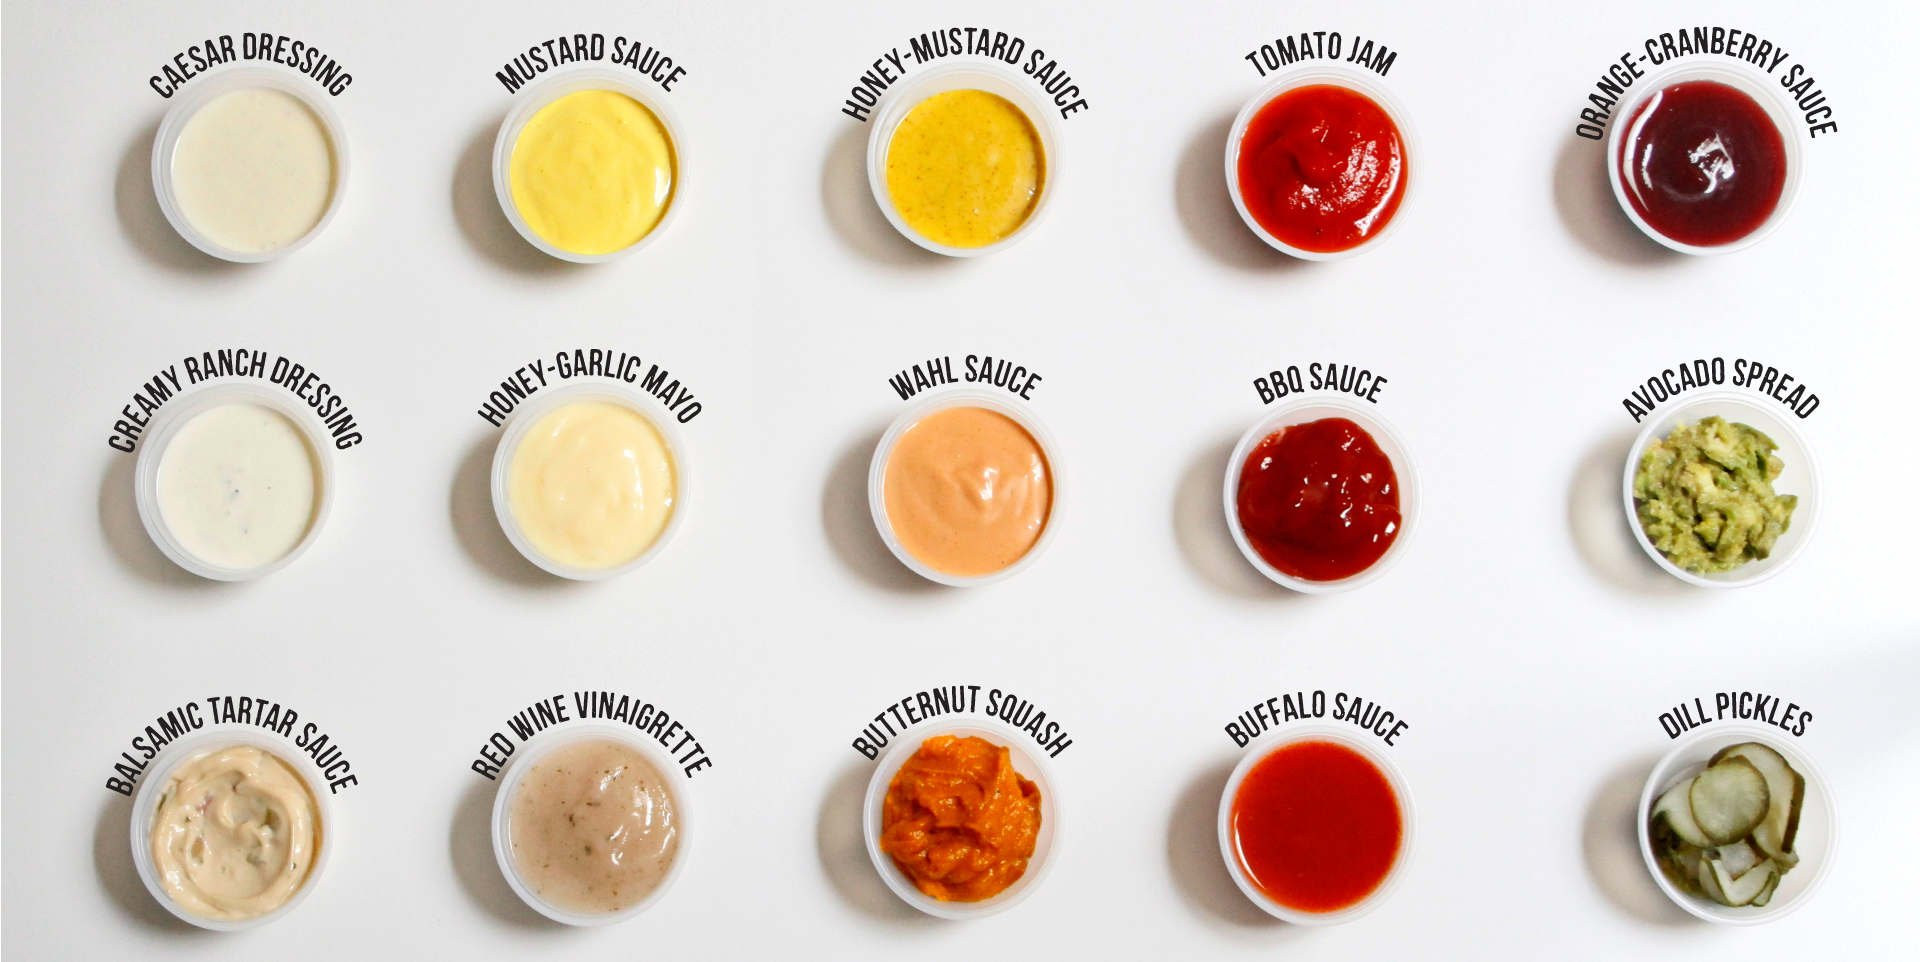 List Of Sauces
 We serve 15 Varieties of Housemade Condiments and Sauces